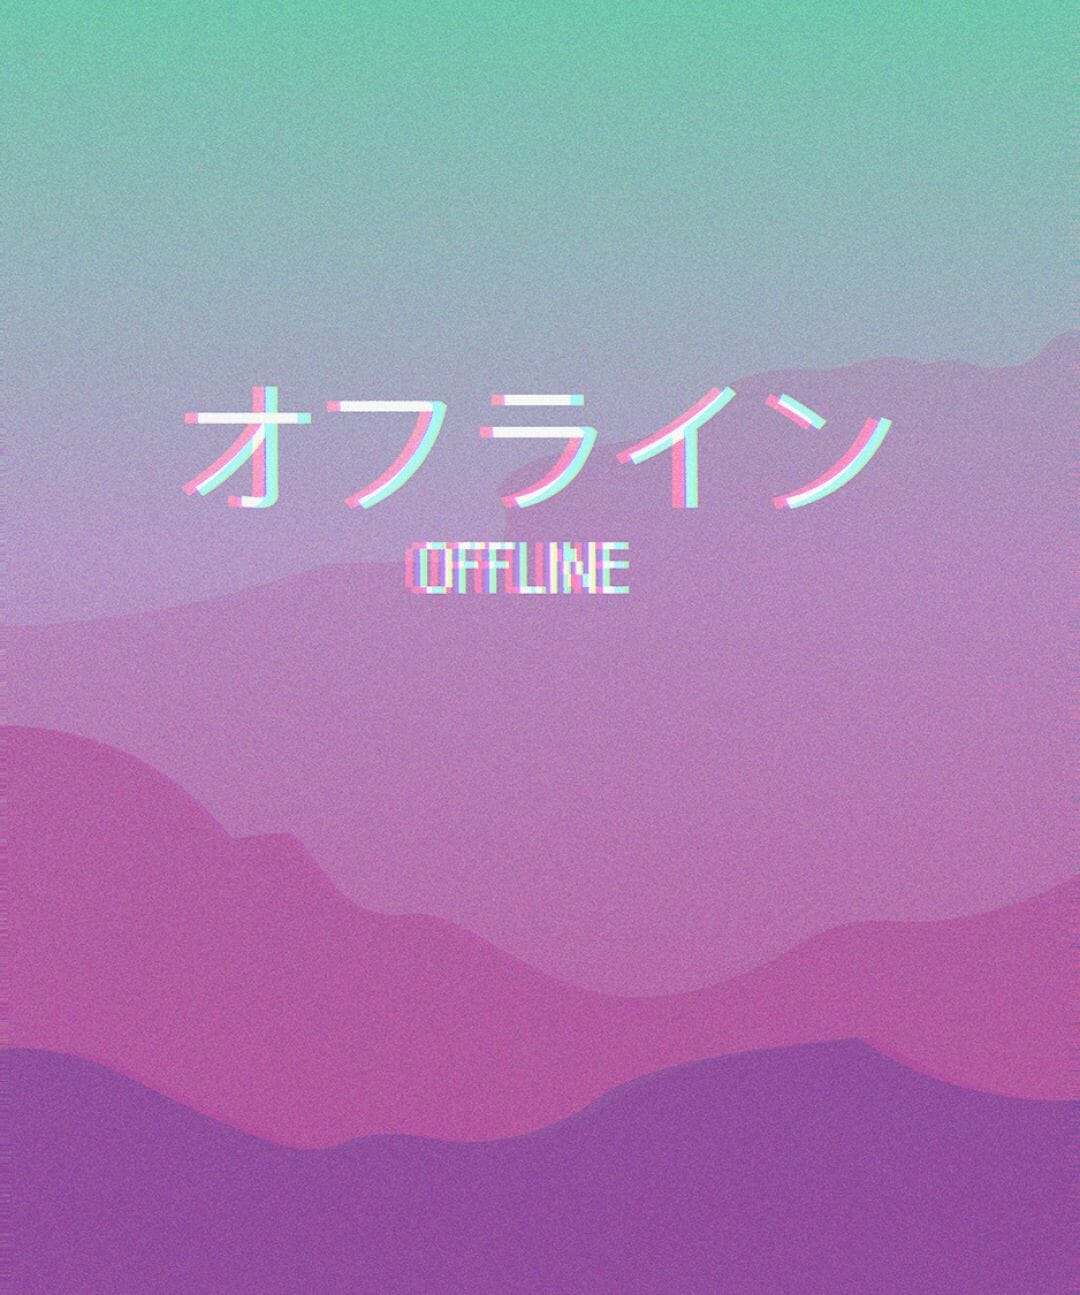 Aesthetic anime background with the word 